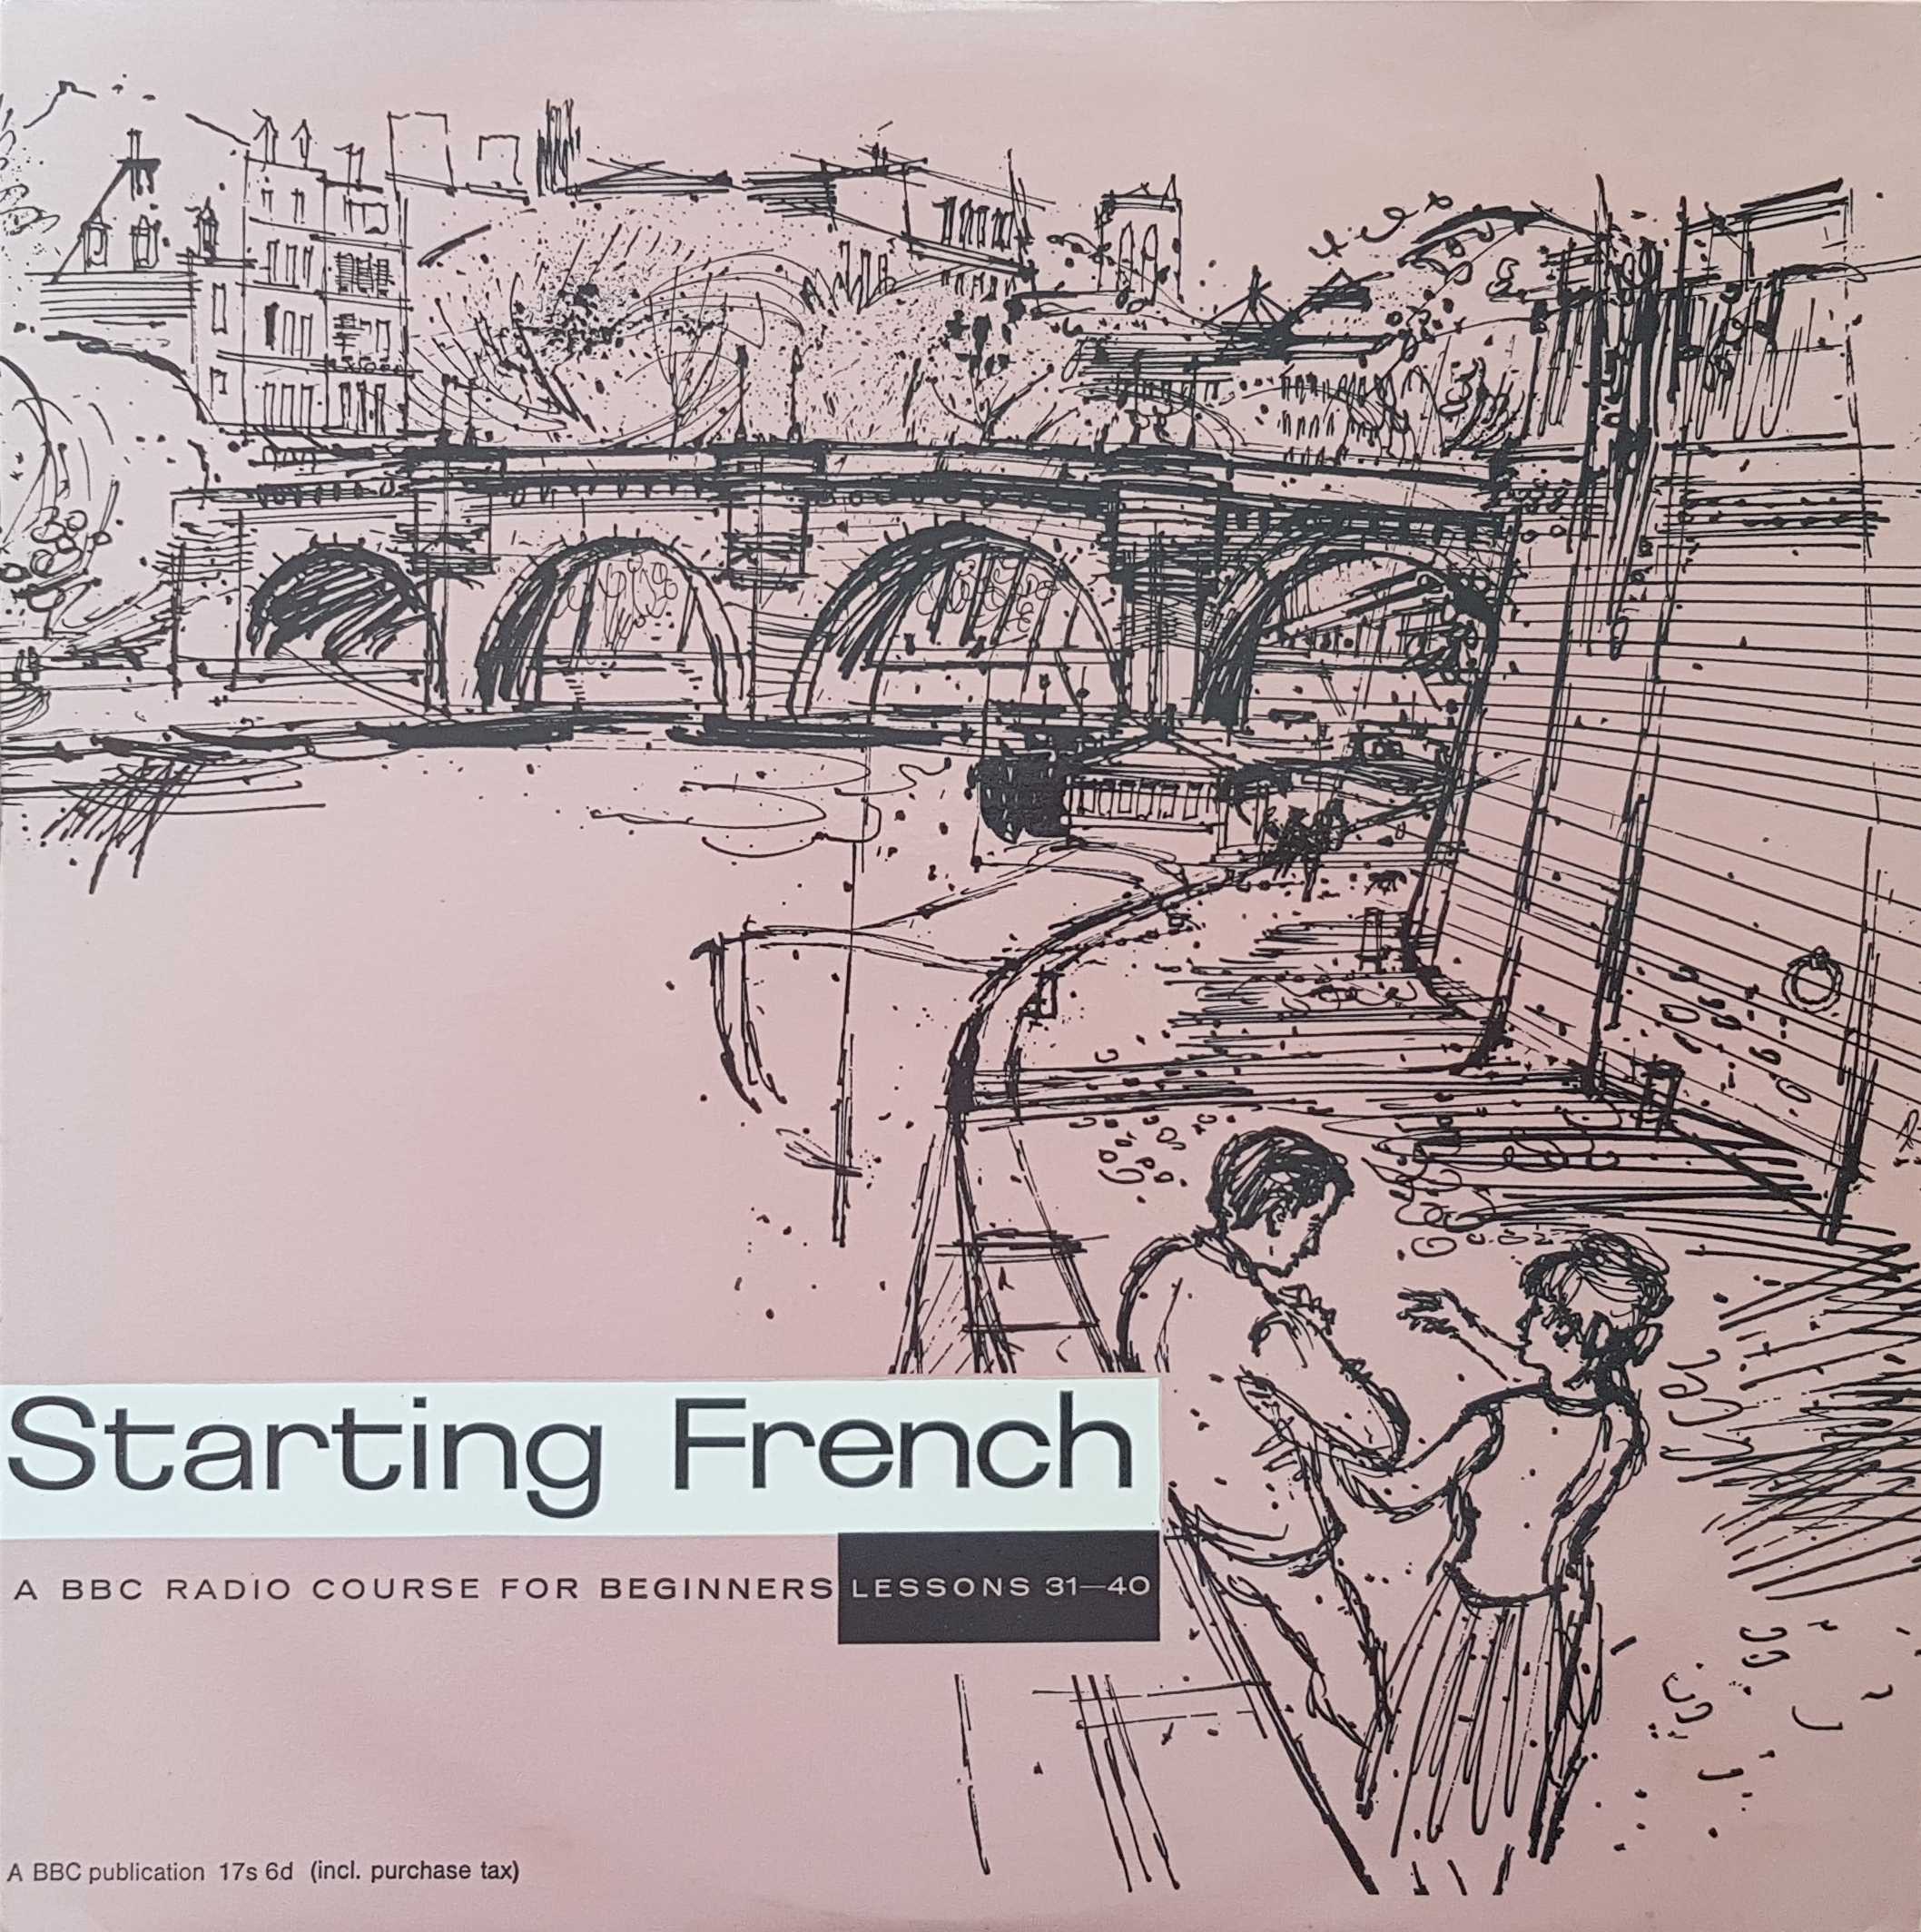 Picture of OP 23/24 Starting French - Parts 31 - 40 by artist Elsie Ferguson from the BBC albums - Records and Tapes library